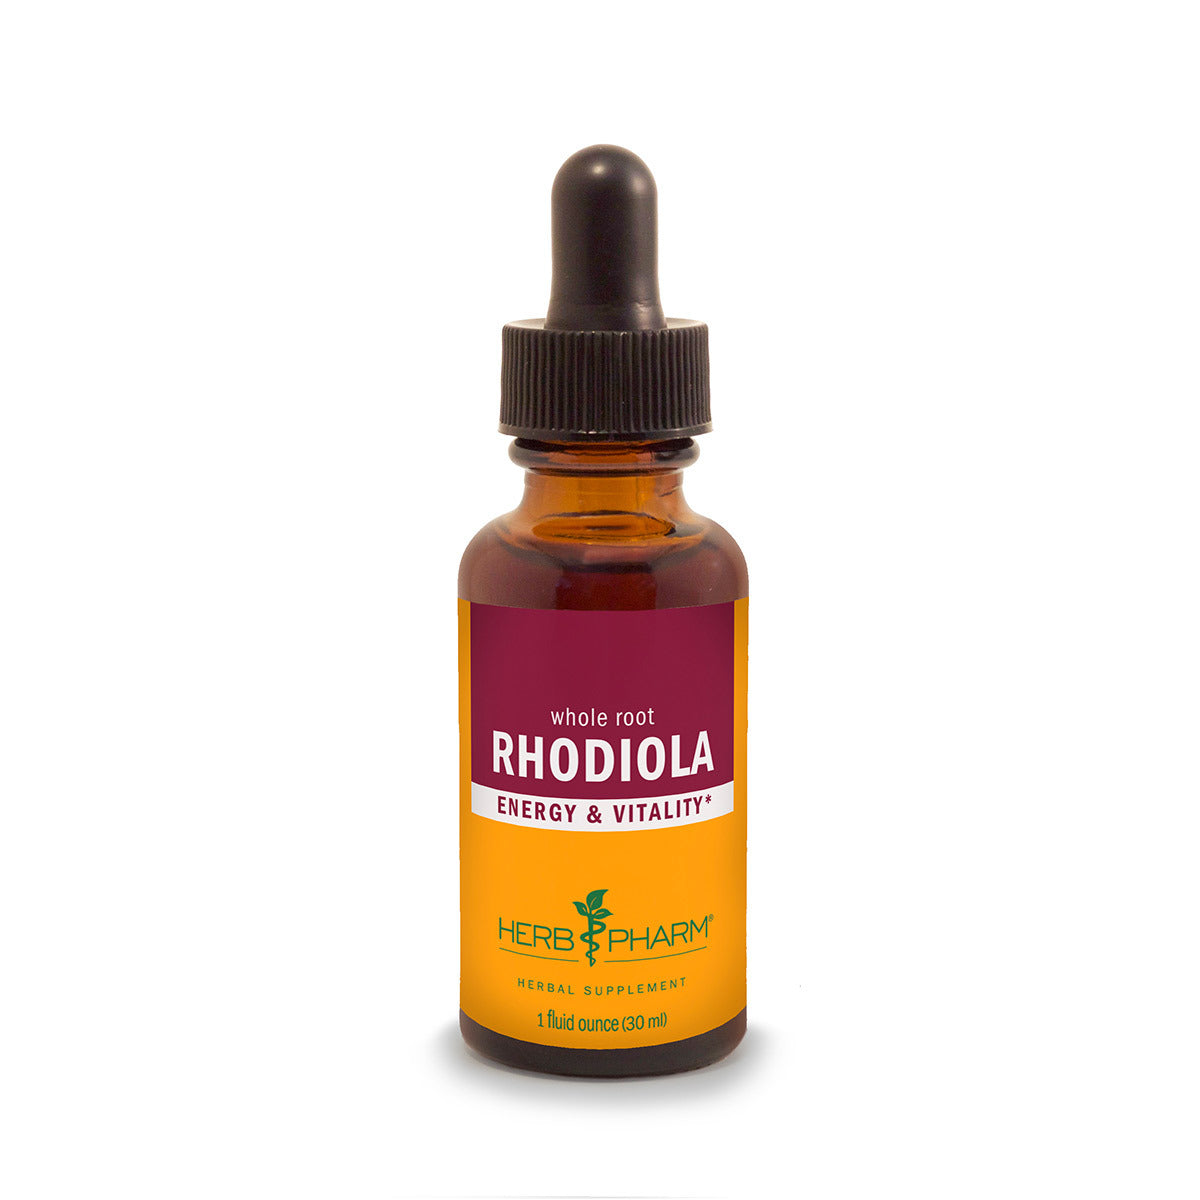 Primary image of Rhodiola Extract